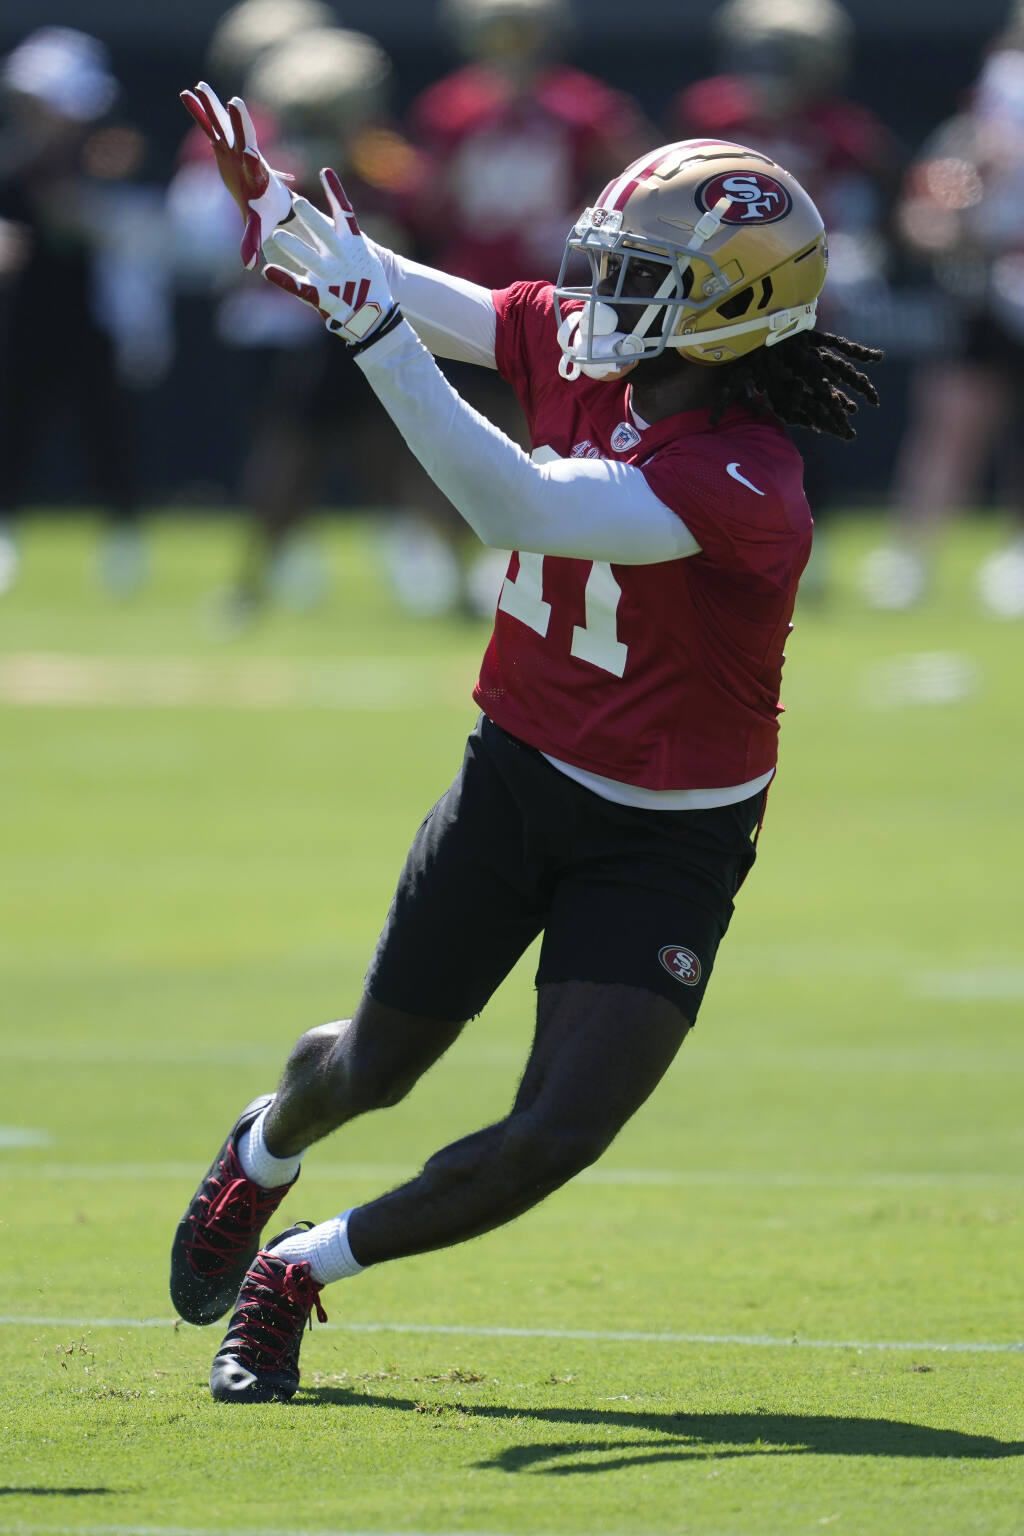 49ers' go-to target at camp is high-flying, football-obsessed Brandon Aiyuk